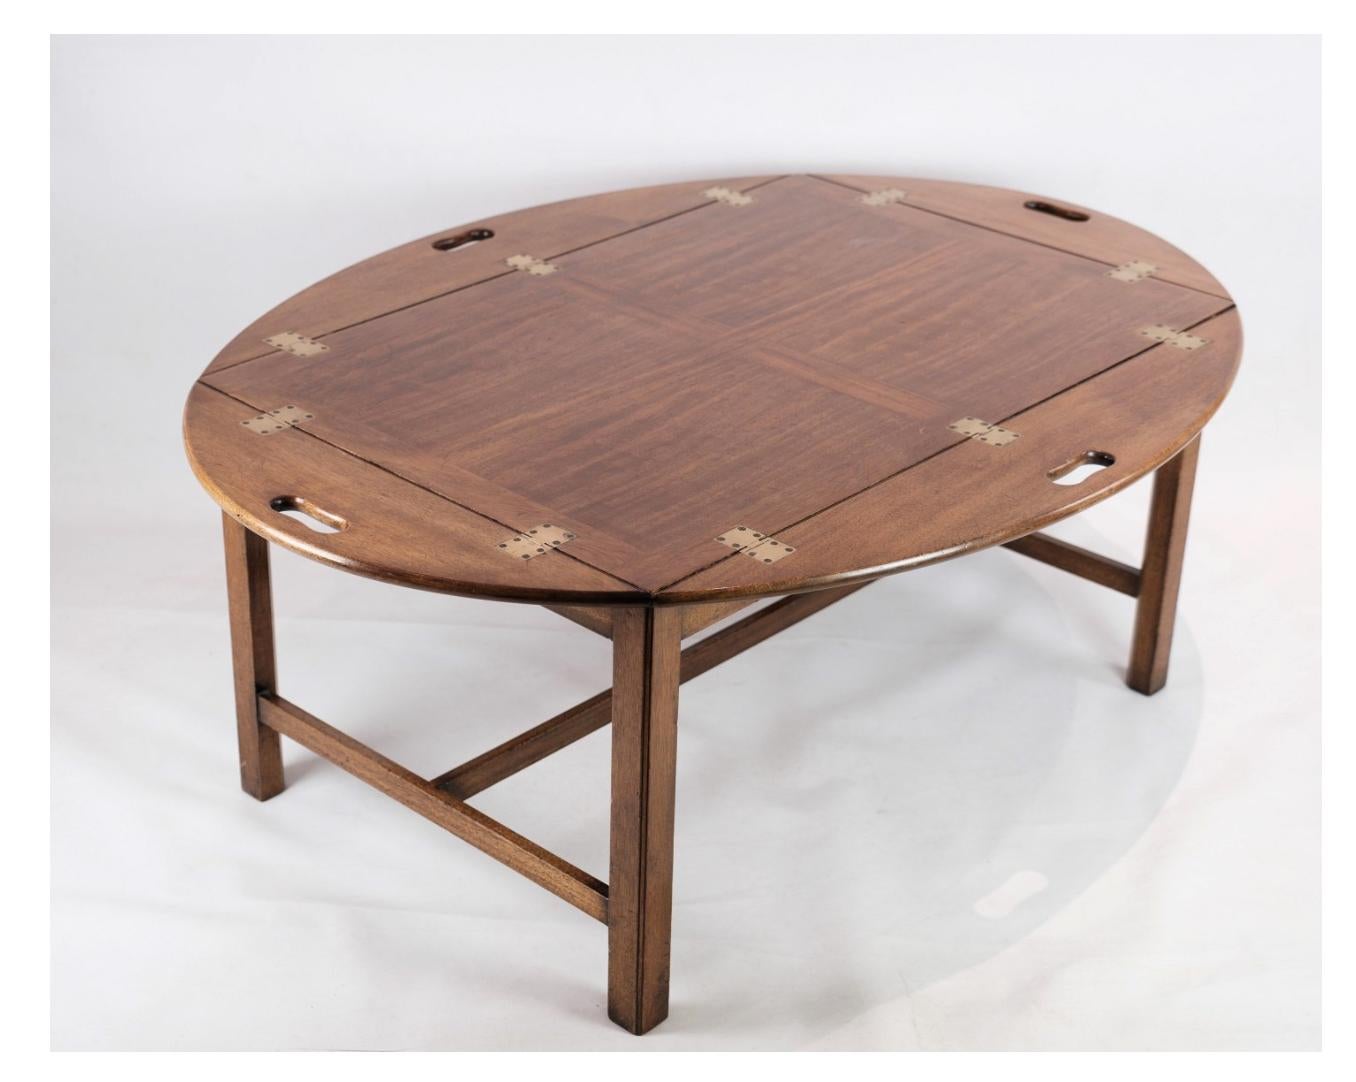 The butler table crafted from mahogany and dating back to the 1950s offers both elegance and functionality.

Constructed from mahogany, renowned for its rich tones and durability, this table exudes a timeless sophistication that complements various